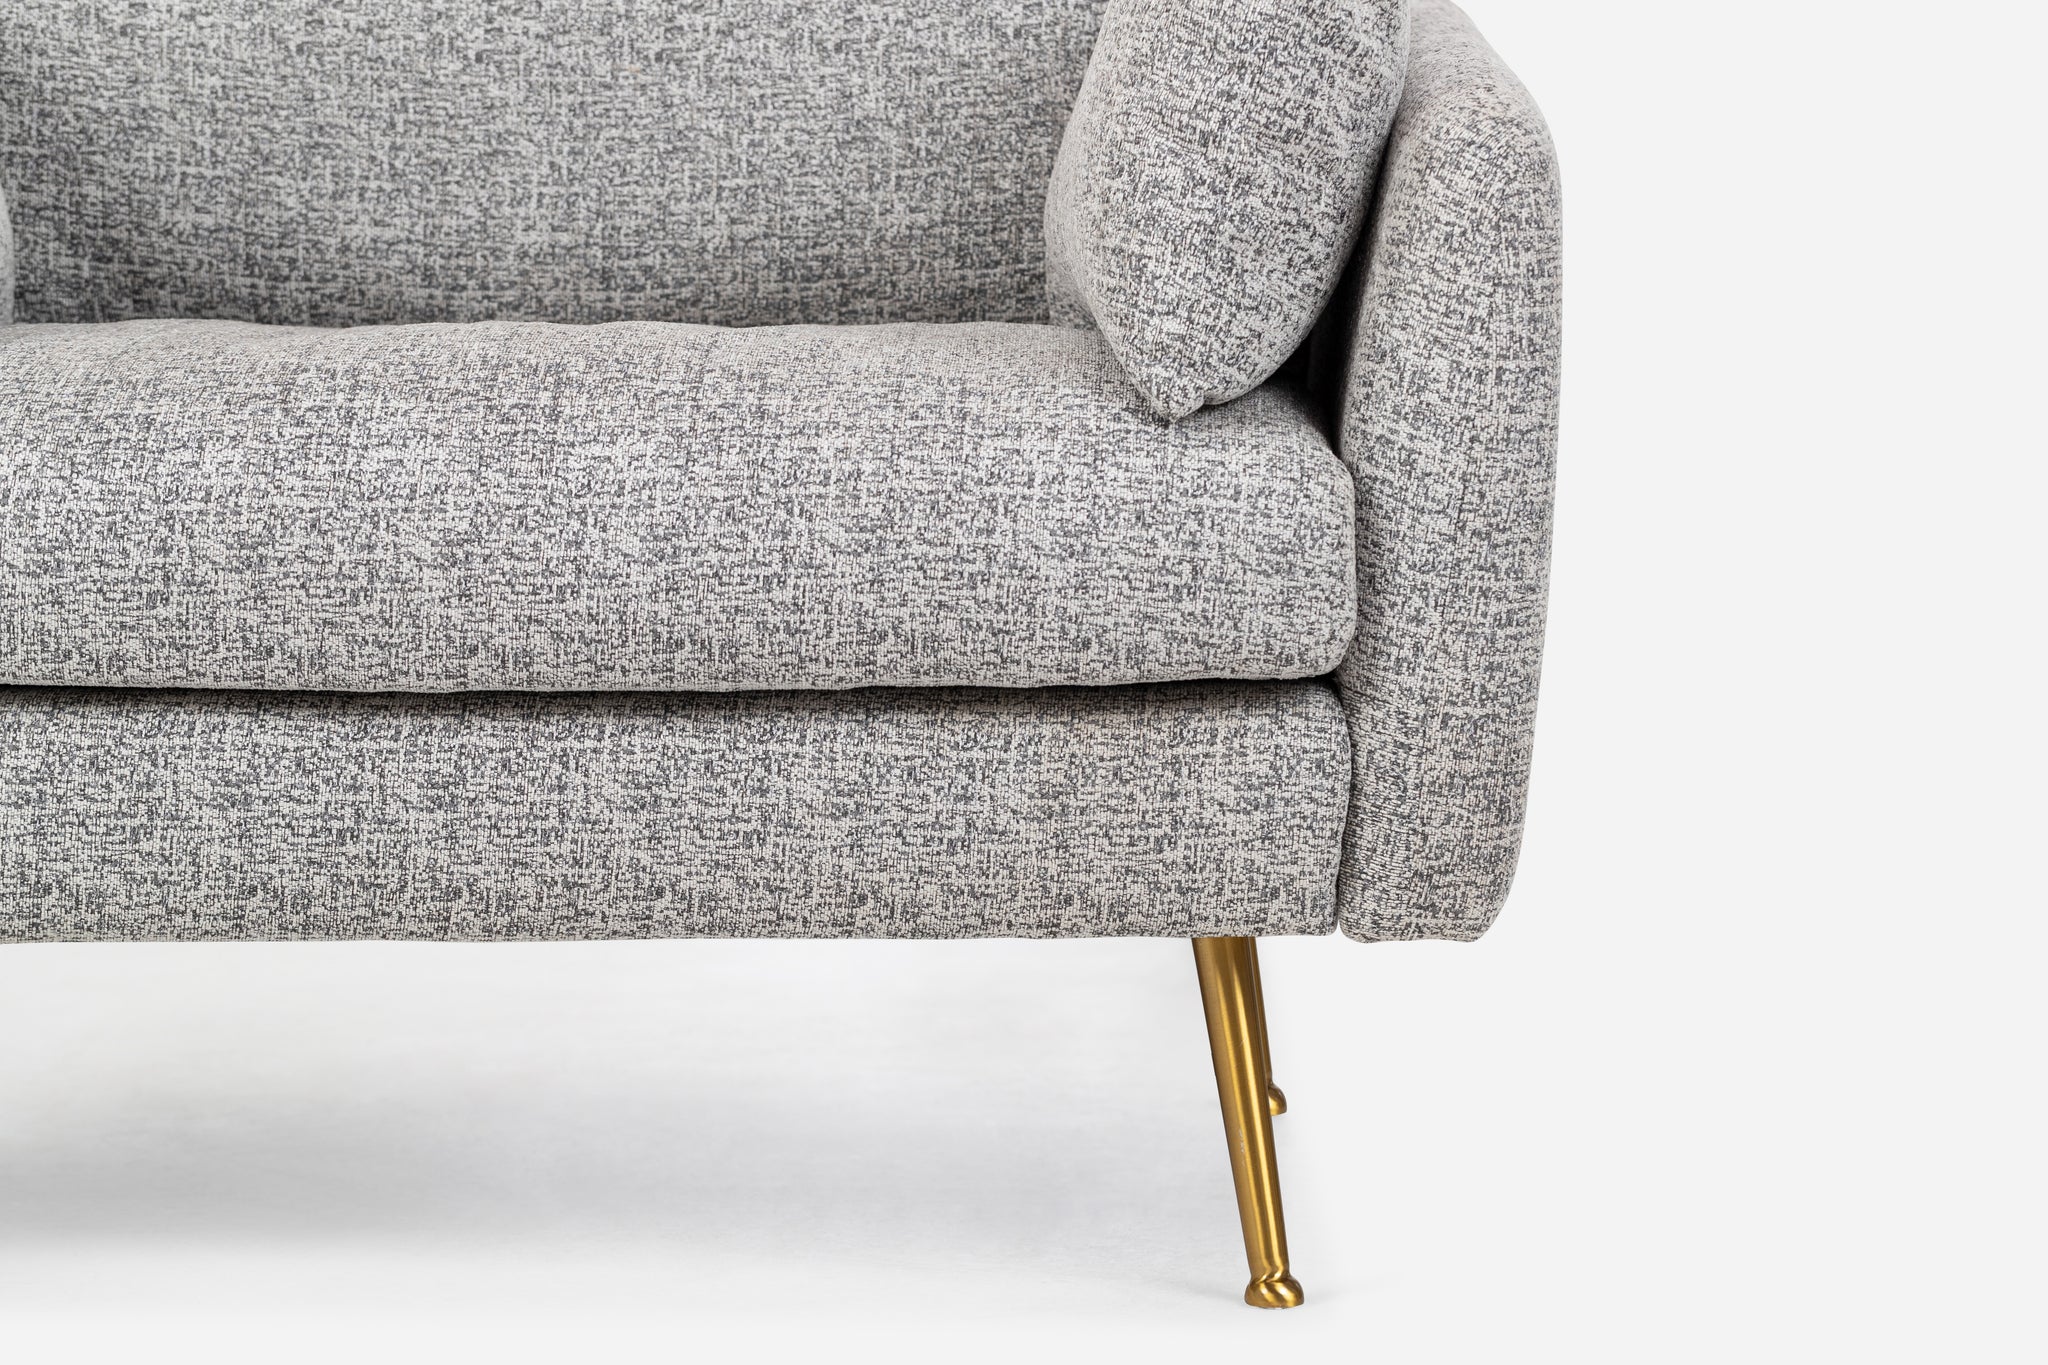 park armchair shown in grey fabric with gold legs